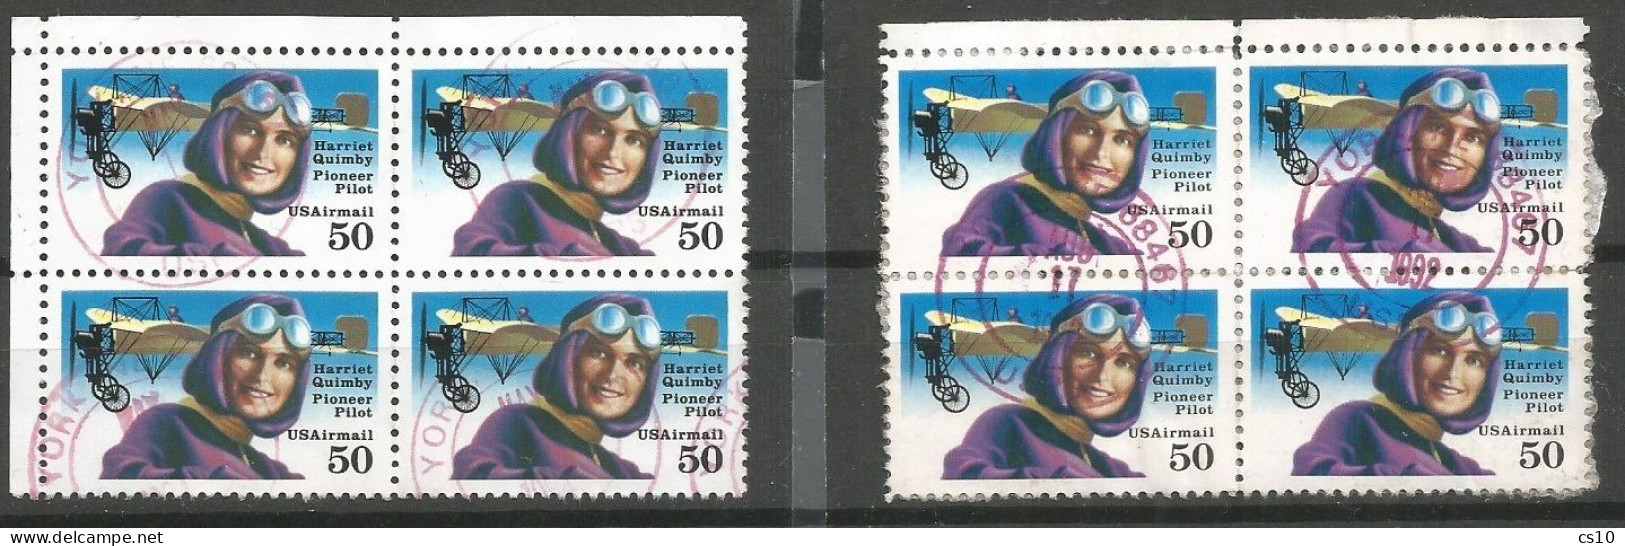 USA 1991 Aviation Pioneers C.50 Harriet Quimby Airmail SC.# C128 In #2 Used Blocks4 Perforation Line + Comb !!! - Sammlungen